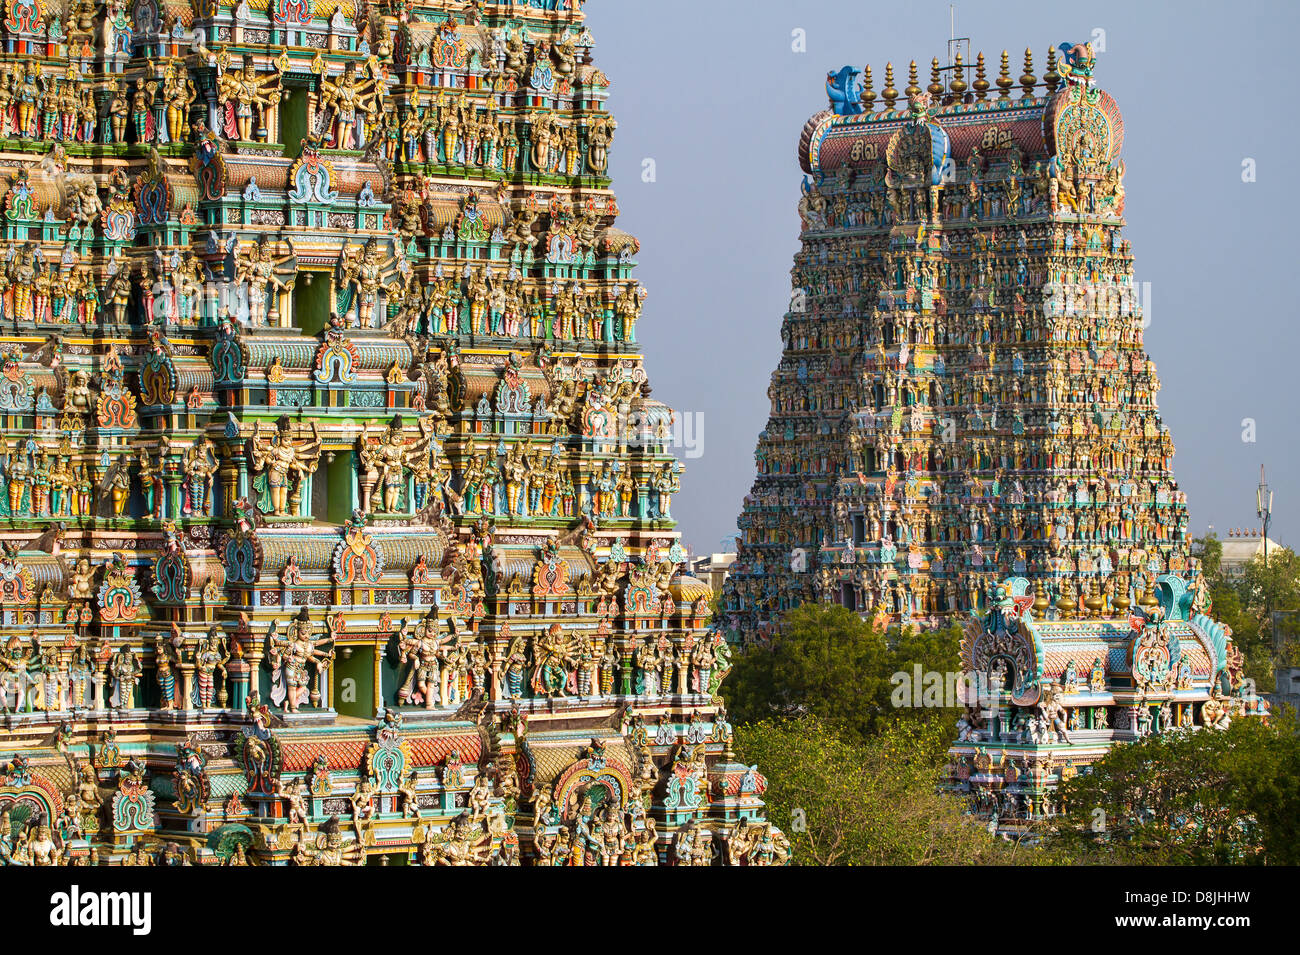 Meenakshi temple - one of the biggest and oldest Indian temples in Madurai, Tamil Nadu, India Stock Photo